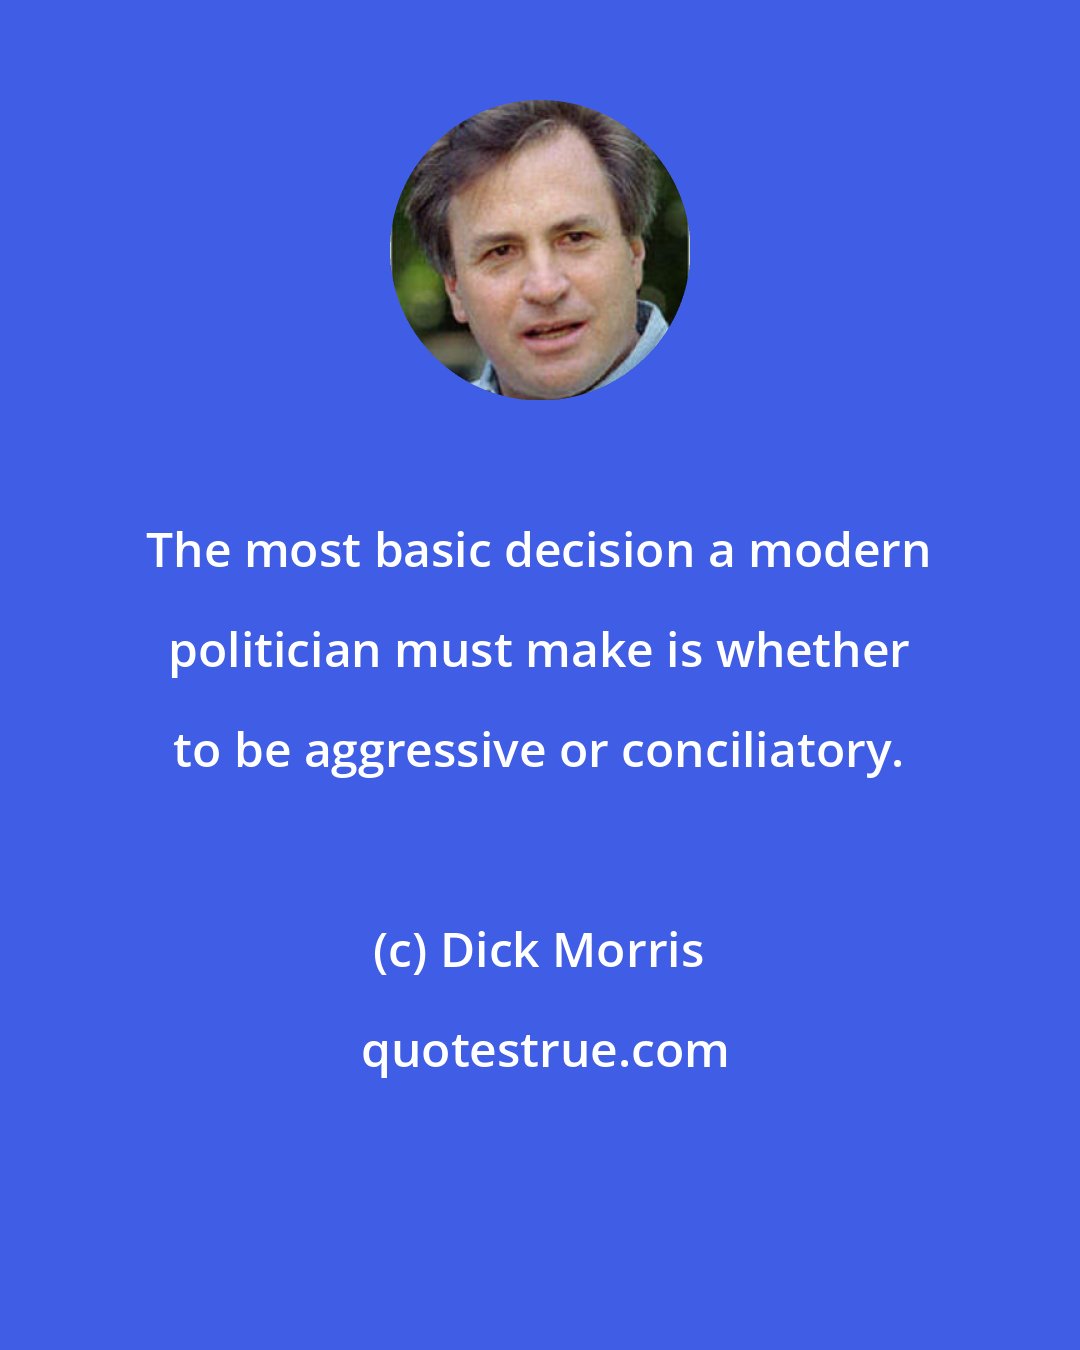 Dick Morris: The most basic decision a modern politician must make is whether to be aggressive or conciliatory.